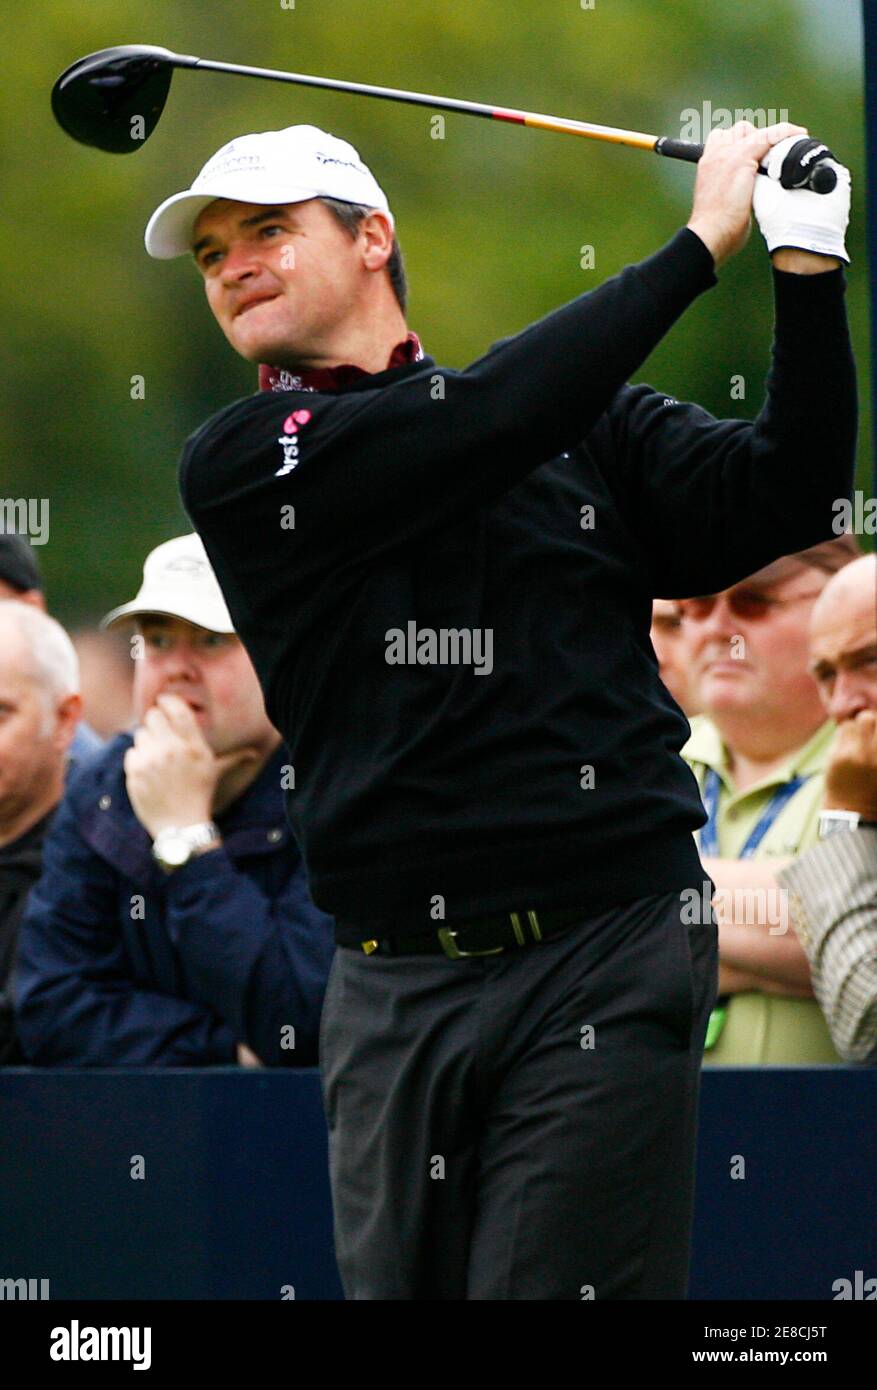 Scotland's Paul Lawrie tees off at the second hole during his second round of the Scottish Open golf tournament at Loch Lommond near Glasgow, Scotland, July 11, 2008. REUTERS/David Moir (BRITAIN) Stock Photo